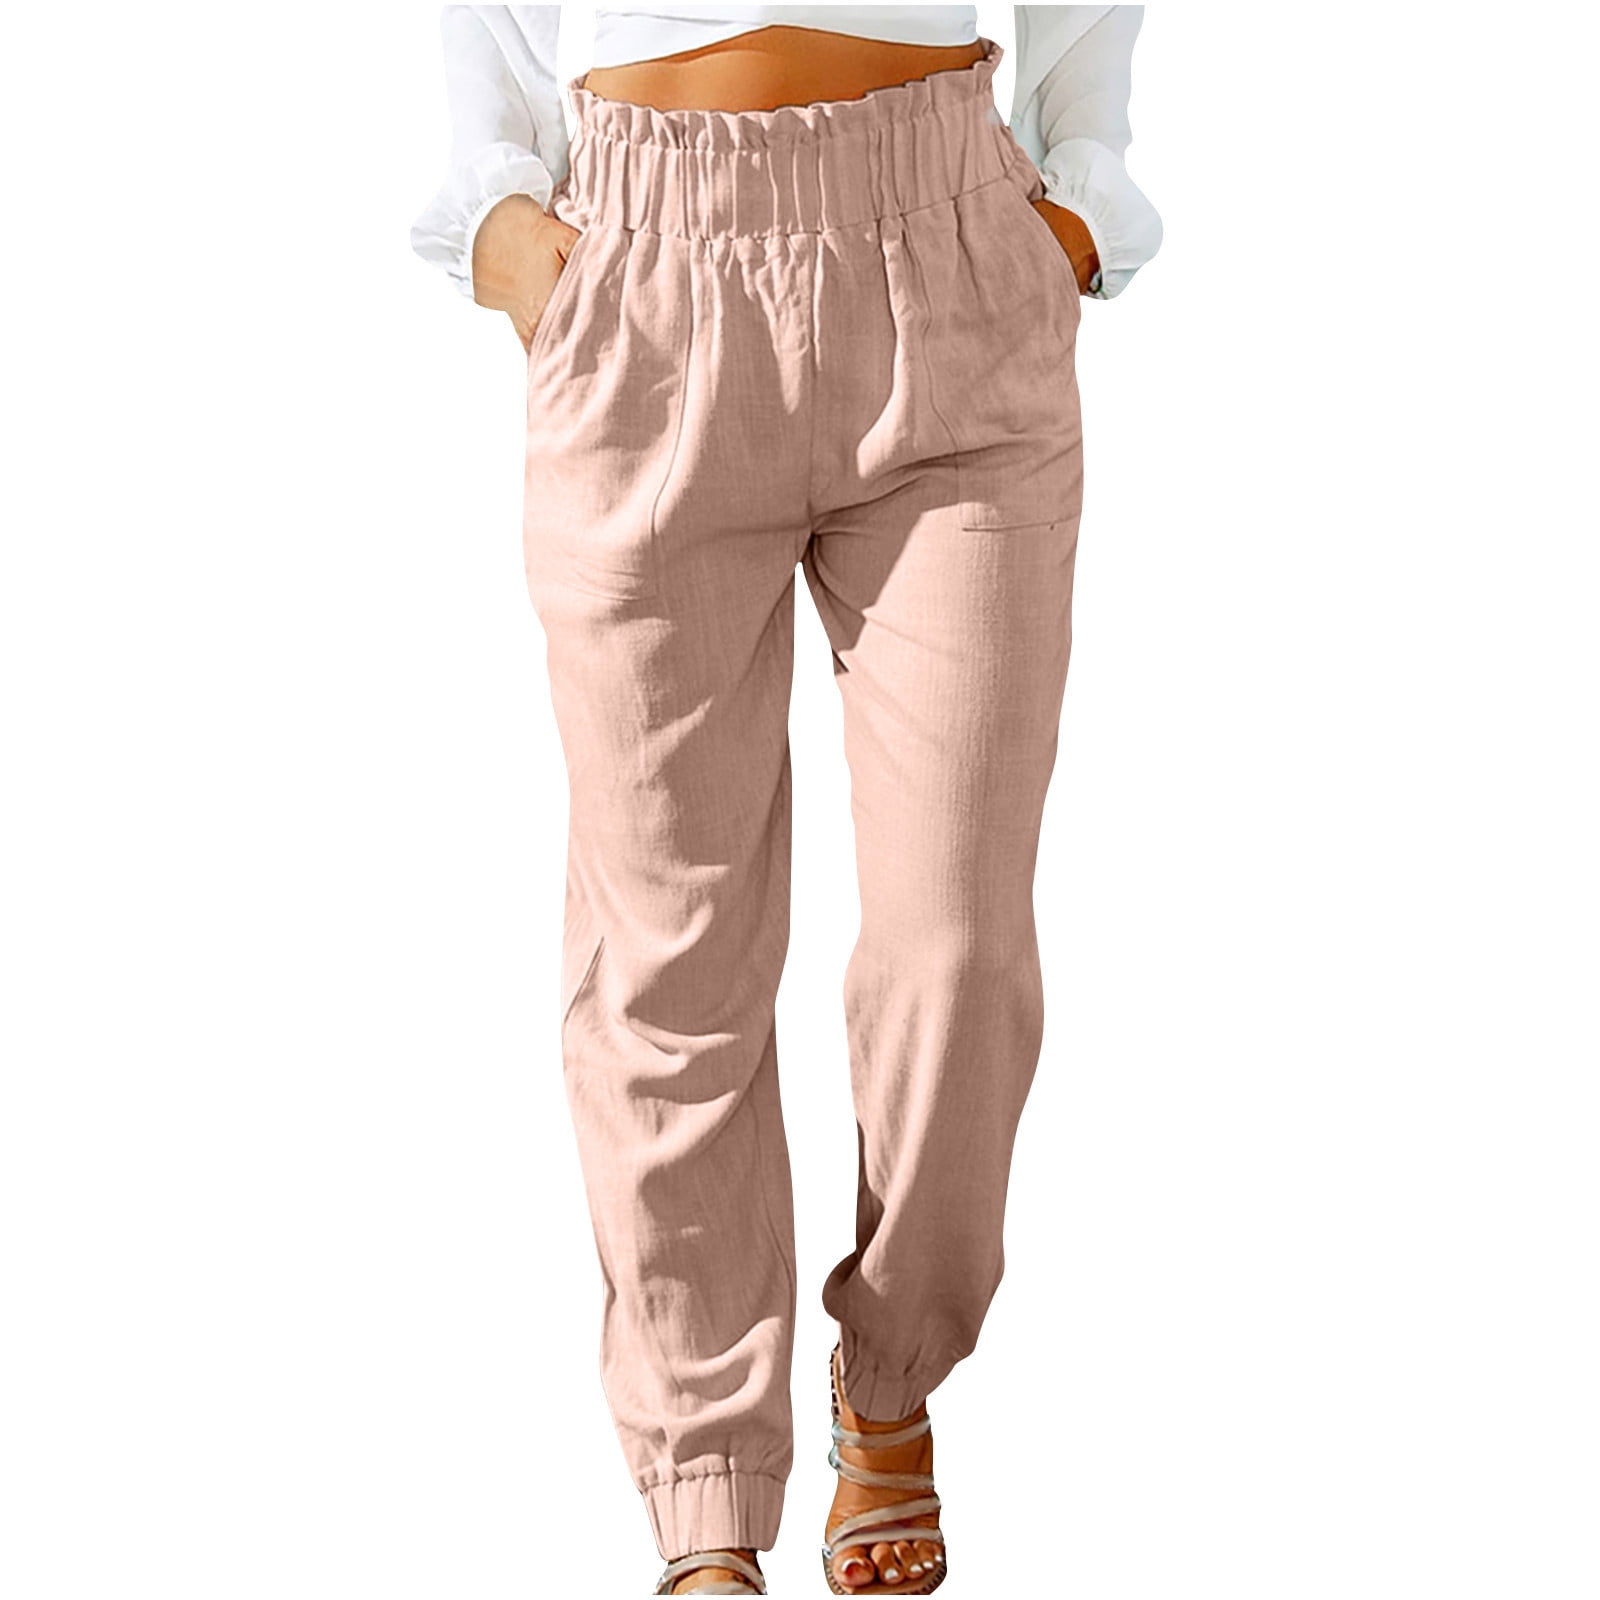 Xihbxyly Linen Pants for Women Womens Pants Cotton Linen Long Lounge Pants  Drawstring Back Elastic Waist Pants Casual Trousers with Pockets, Coffee,  XXXL Under 1 Dollar Items Only #3 